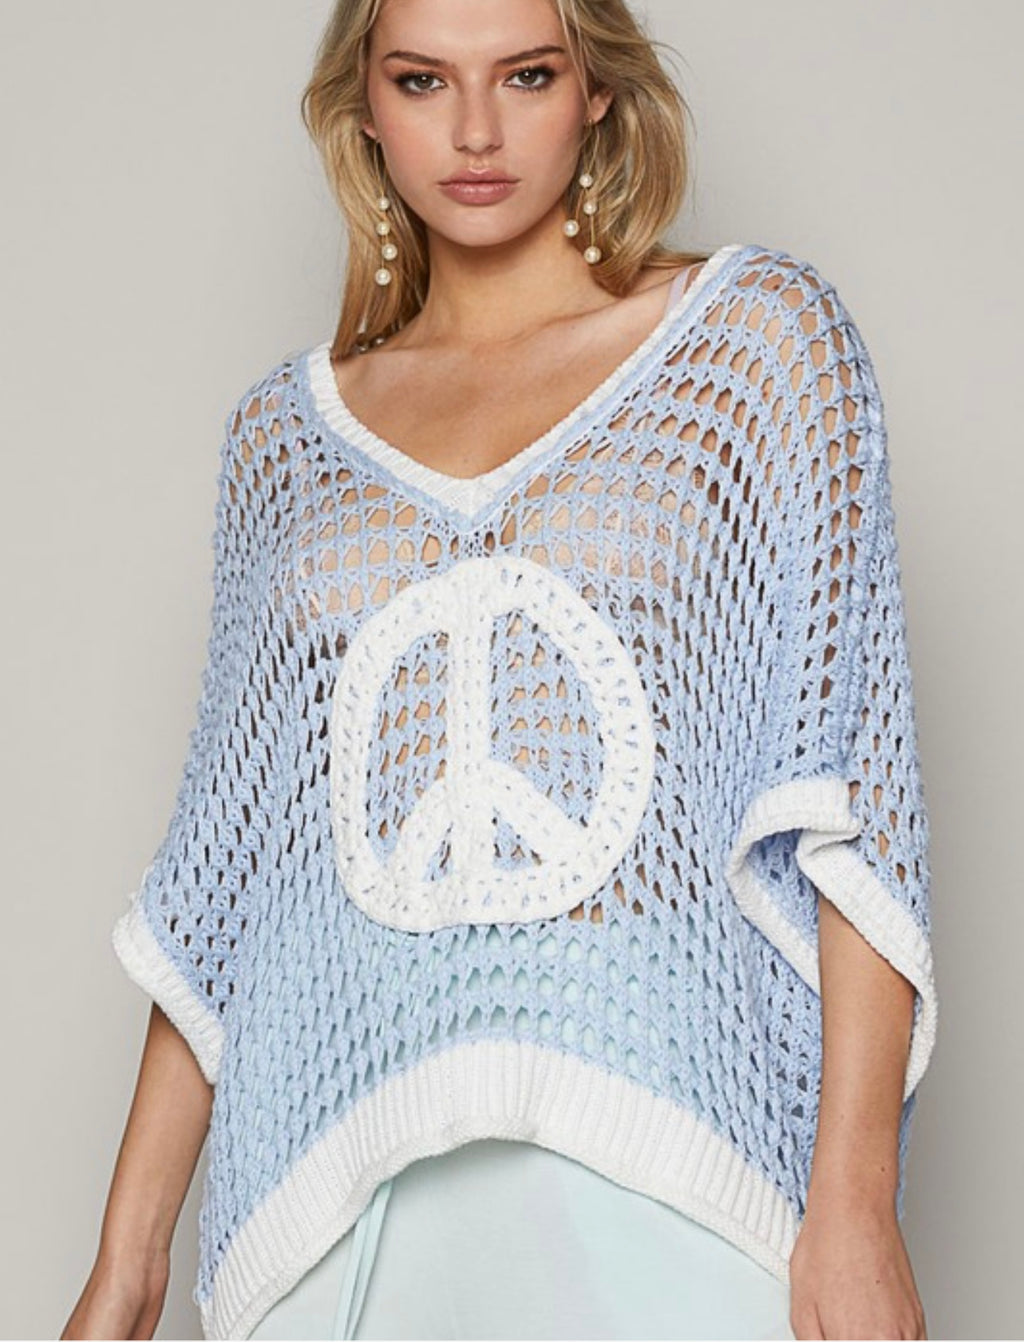 Peace, Love, and Sun Sweater - Blue/White